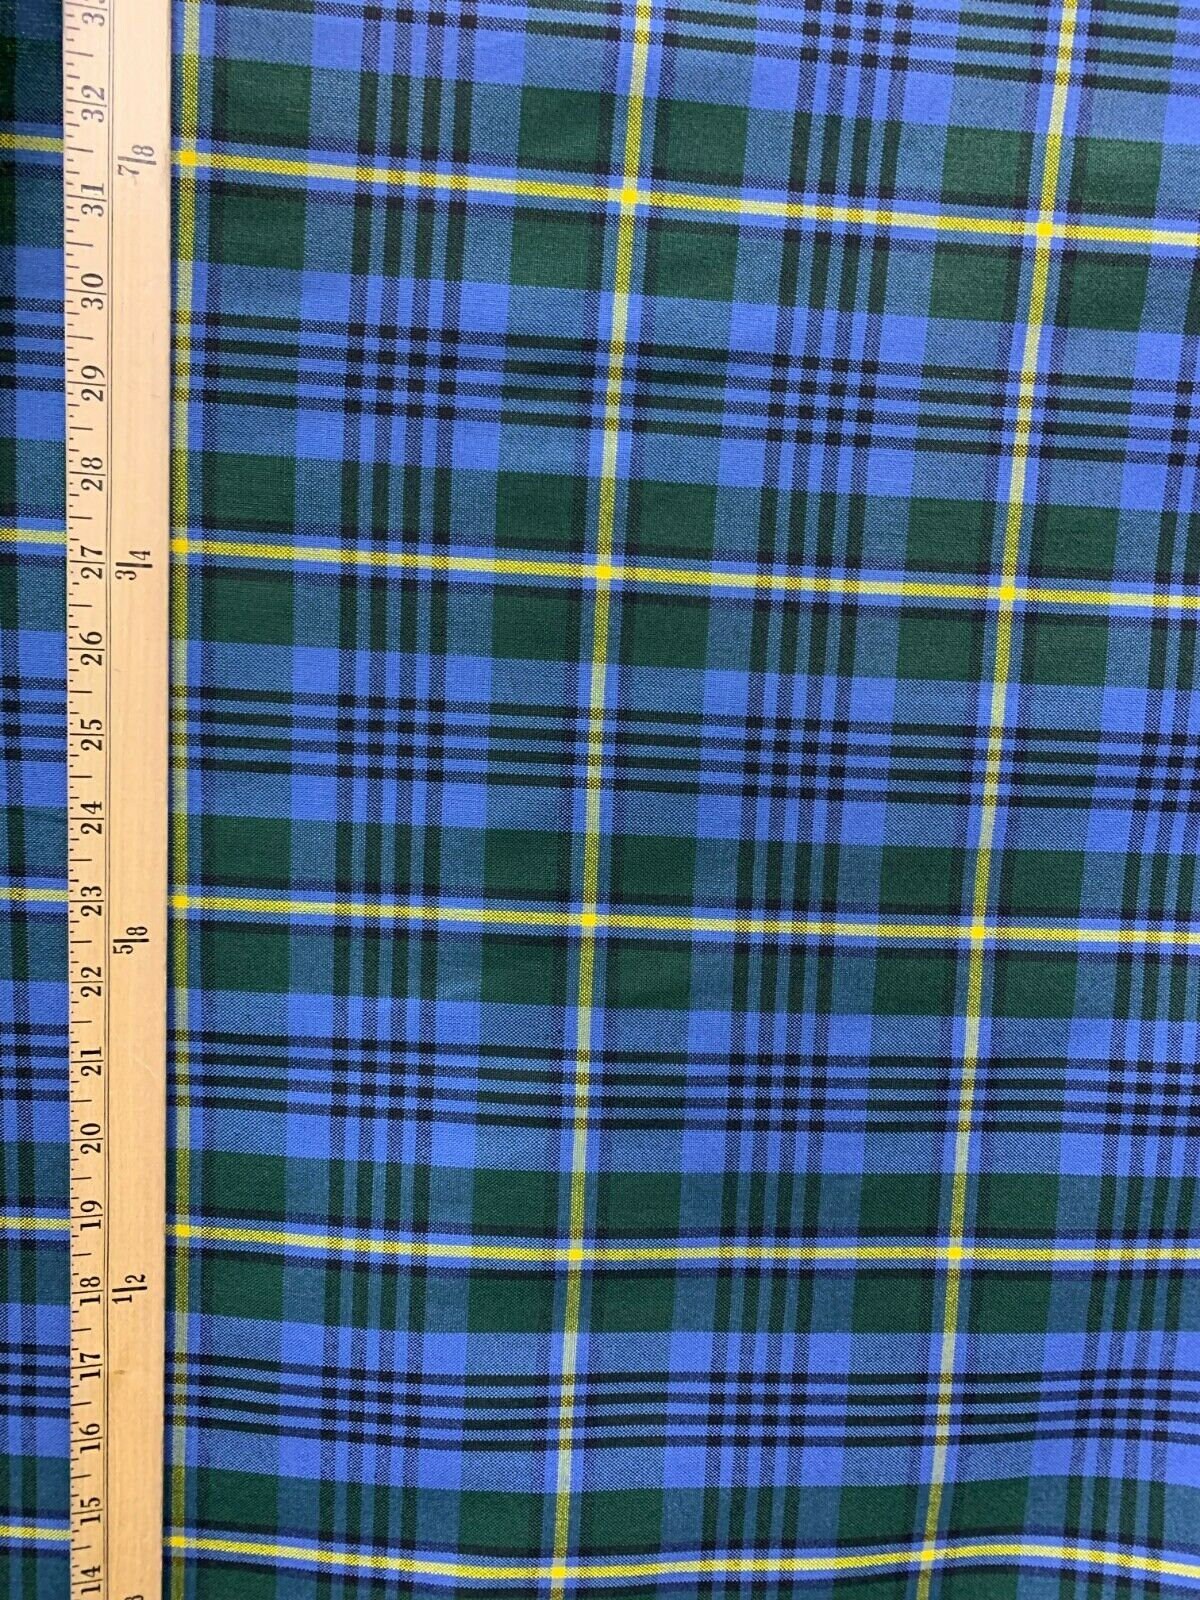 BLUE GREEN YELLOW Plaid Poly Cotton Uniform Poplin Fabric (60 in.) Sold By The Yard